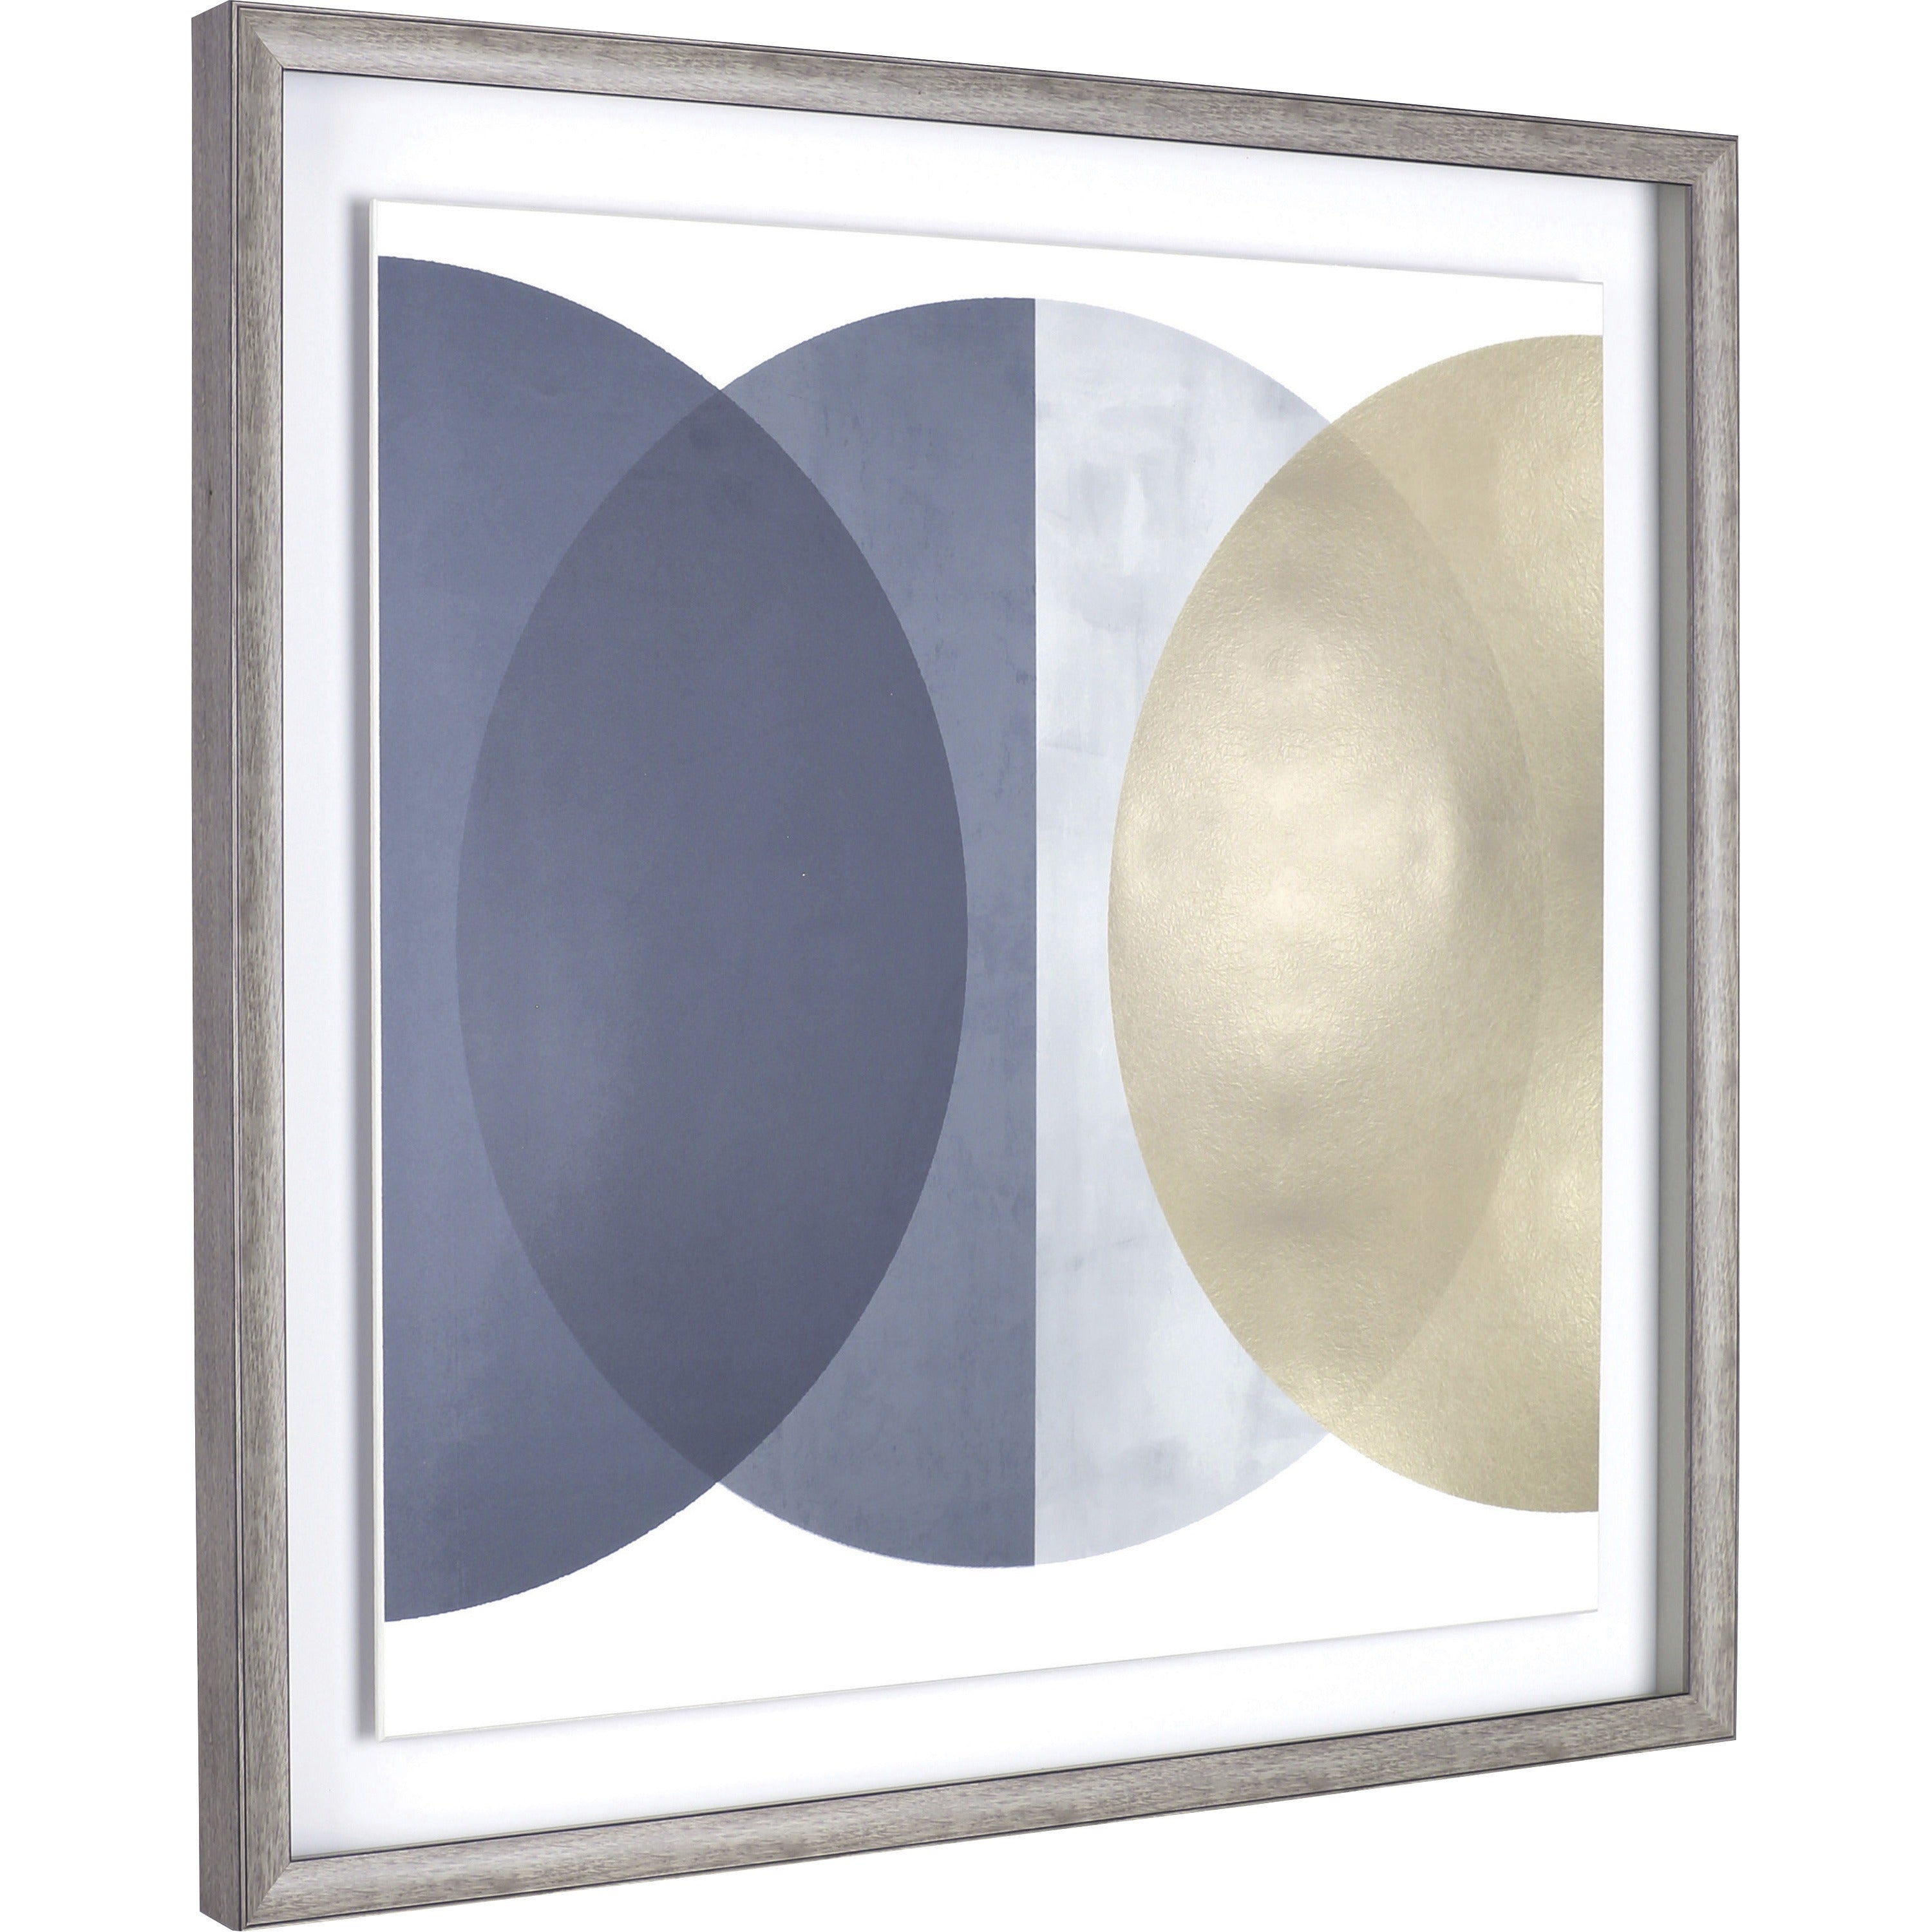 Lorell Circle I Framed Abstract Art - 29.25" x 29.25" Frame Size - 1 Each - Gray, Yellow